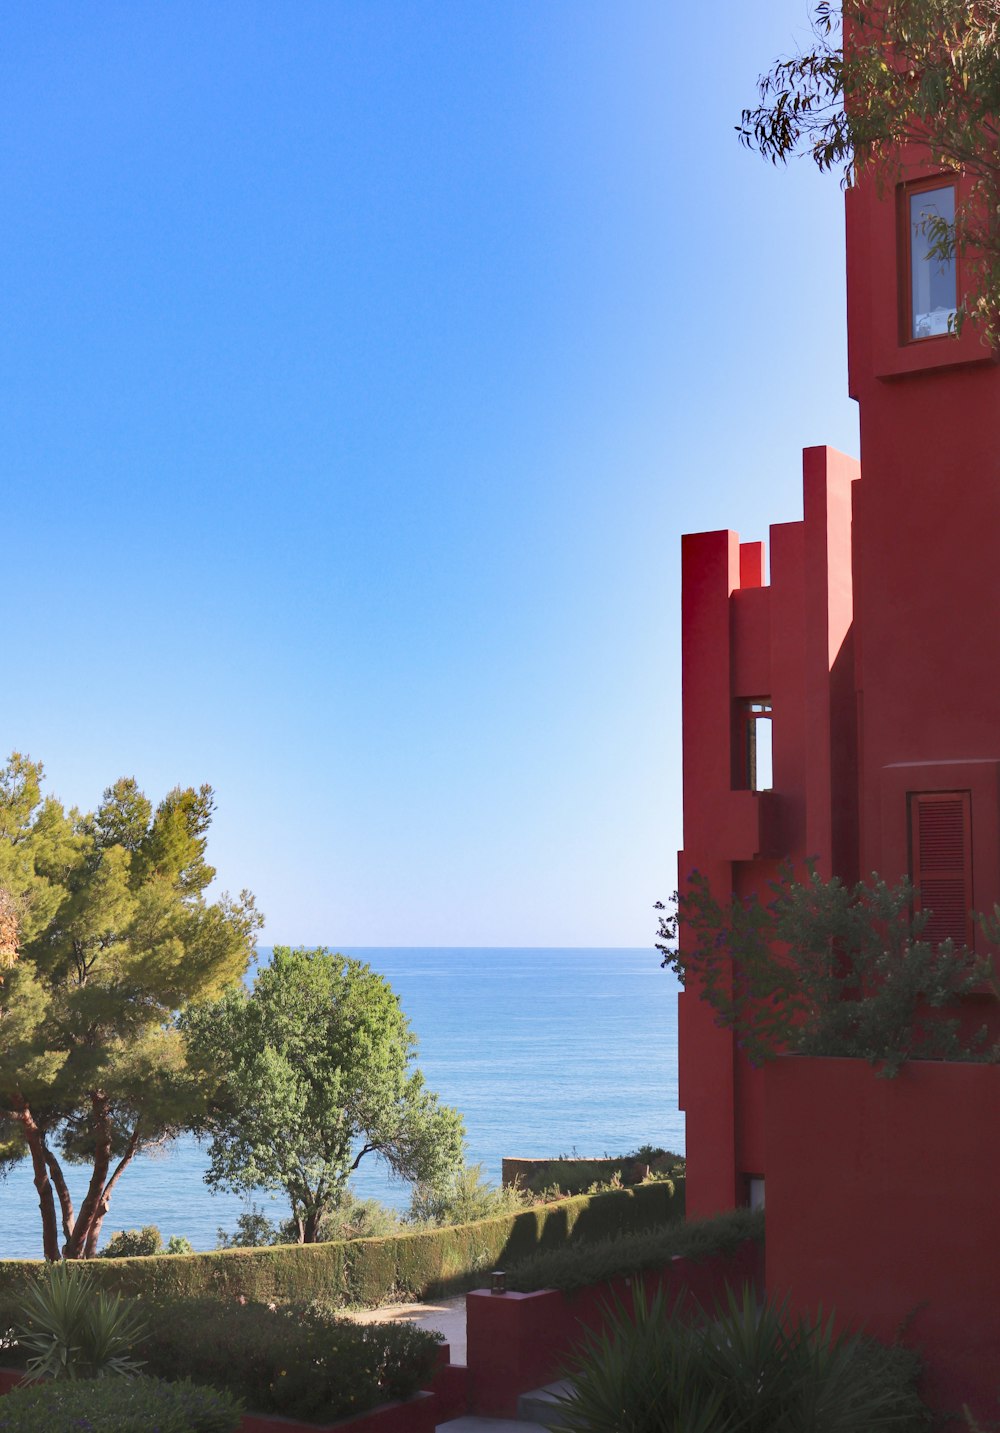 a view of the ocean from a red building